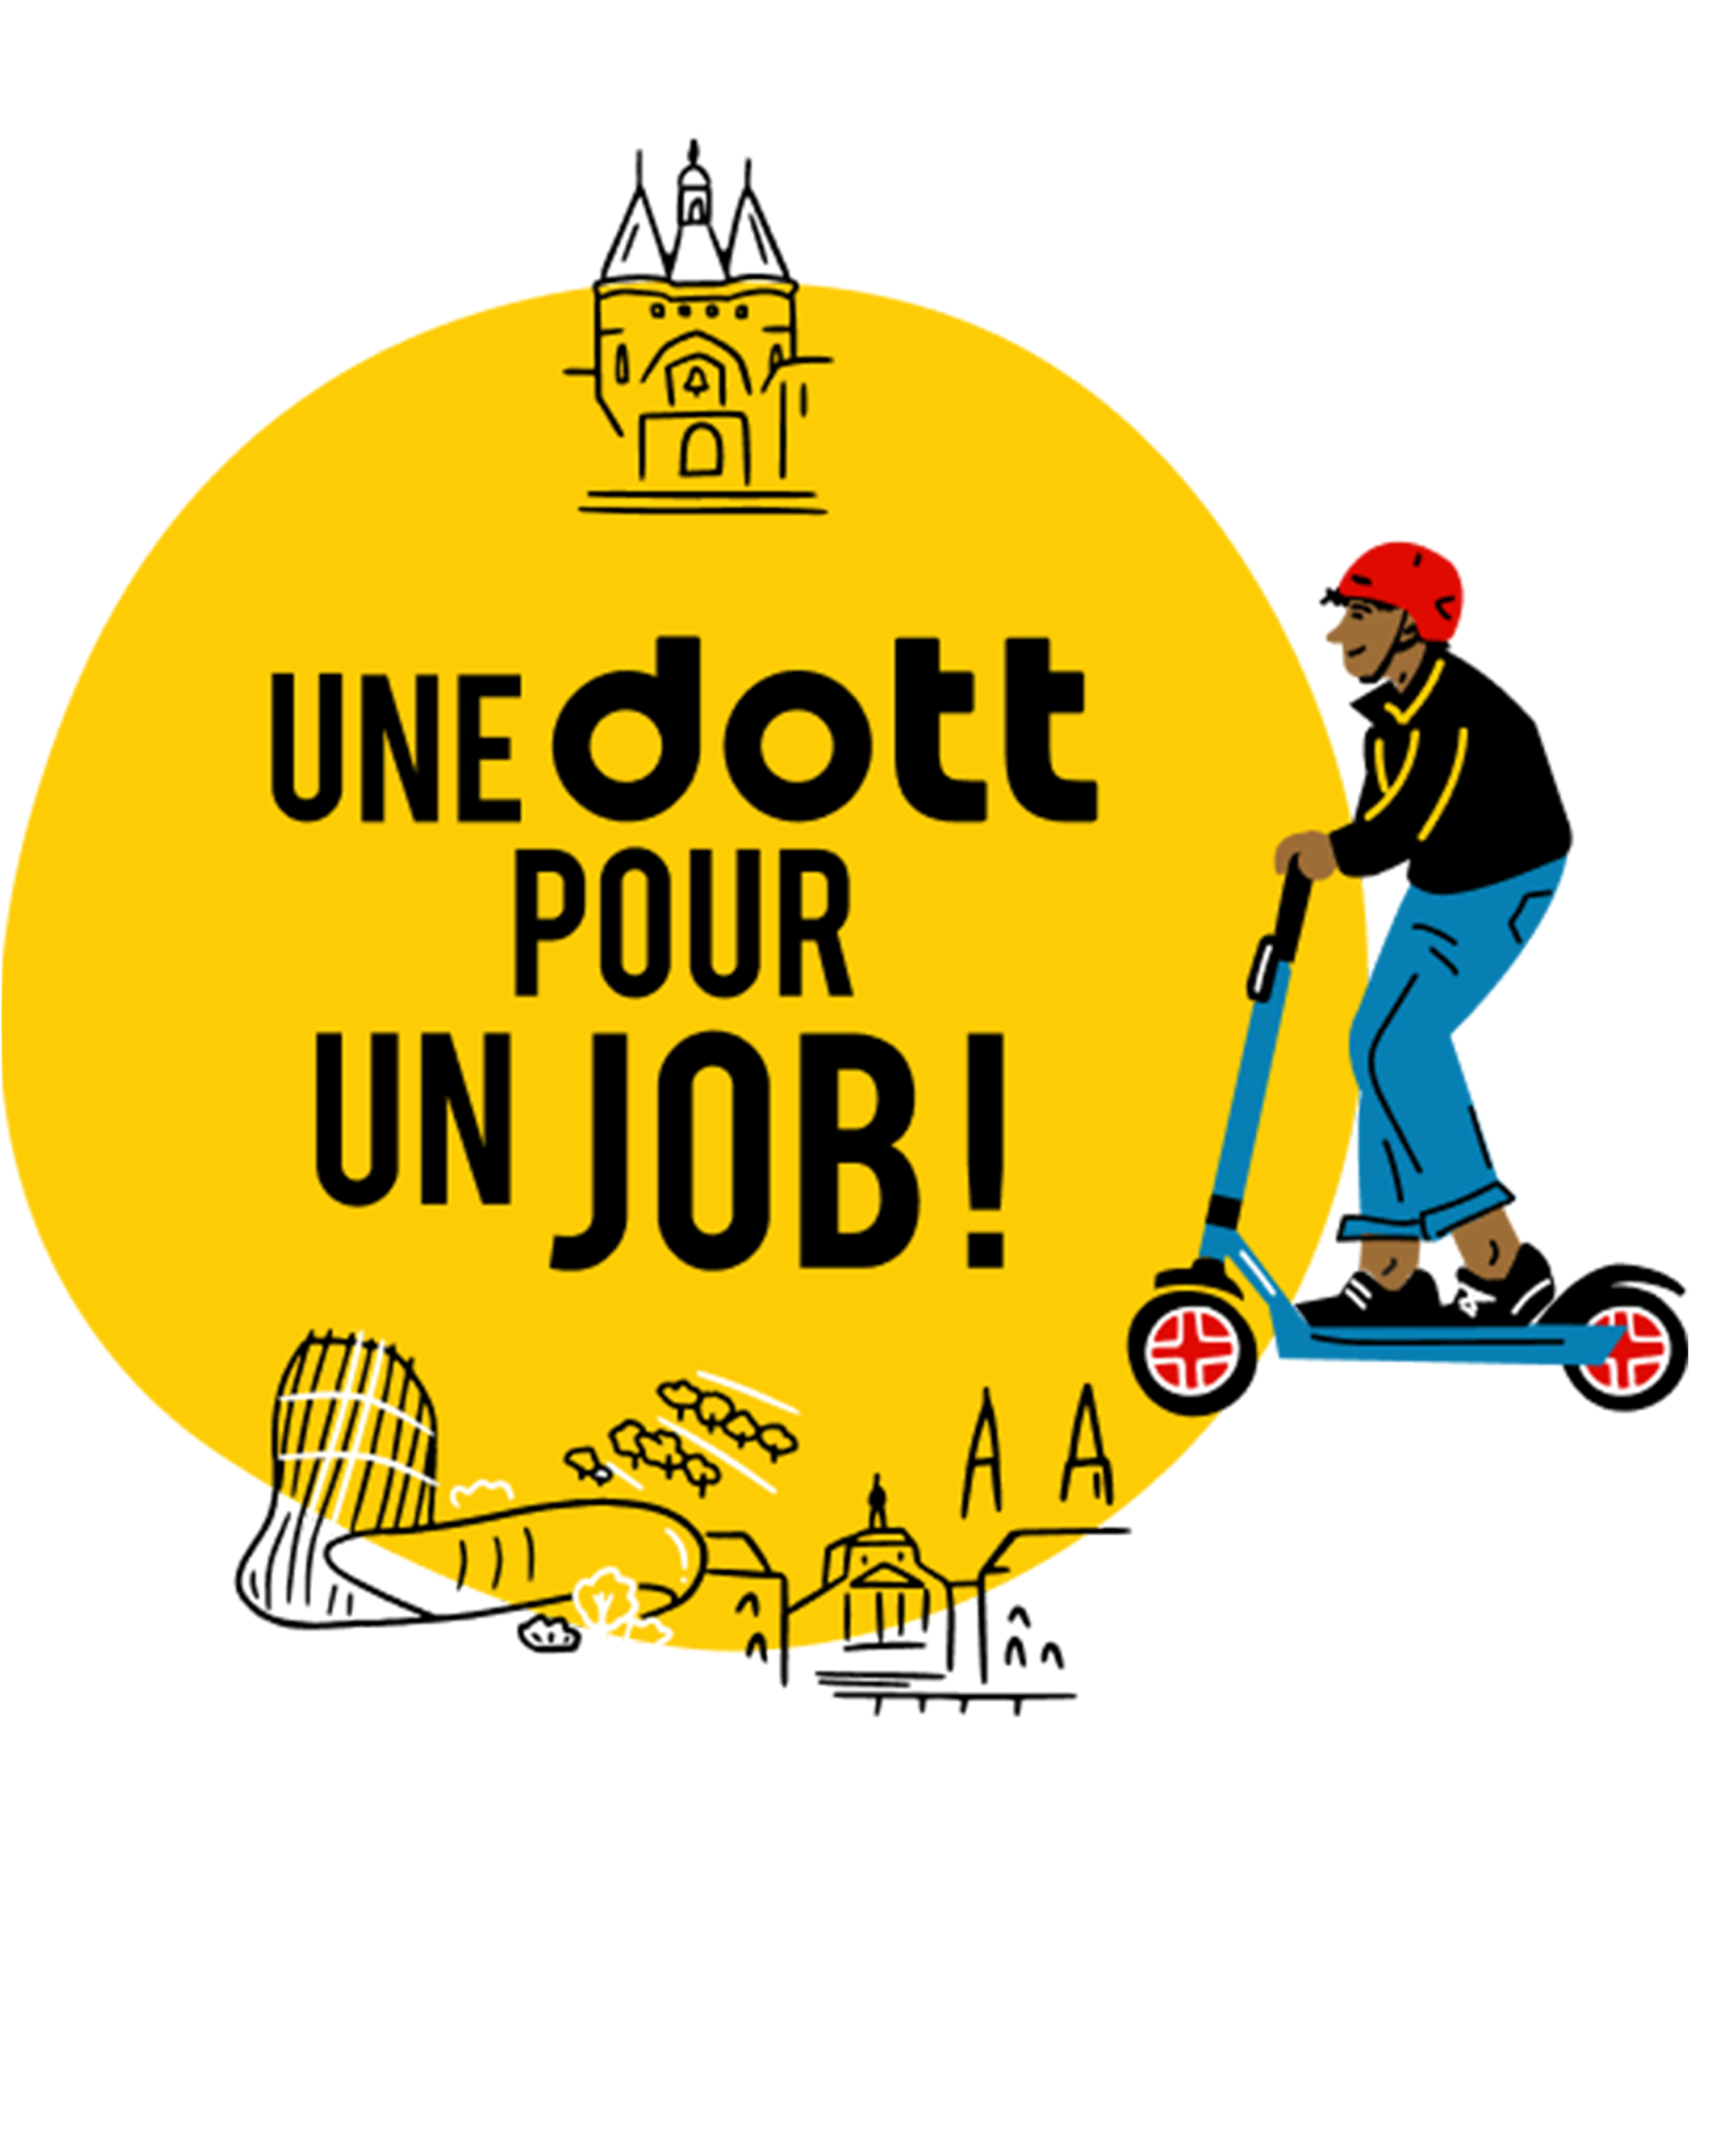 An illustration of Paris landmarks, with a yellow circle behind and a man wearing a helmet and riding a scooter on the right side.